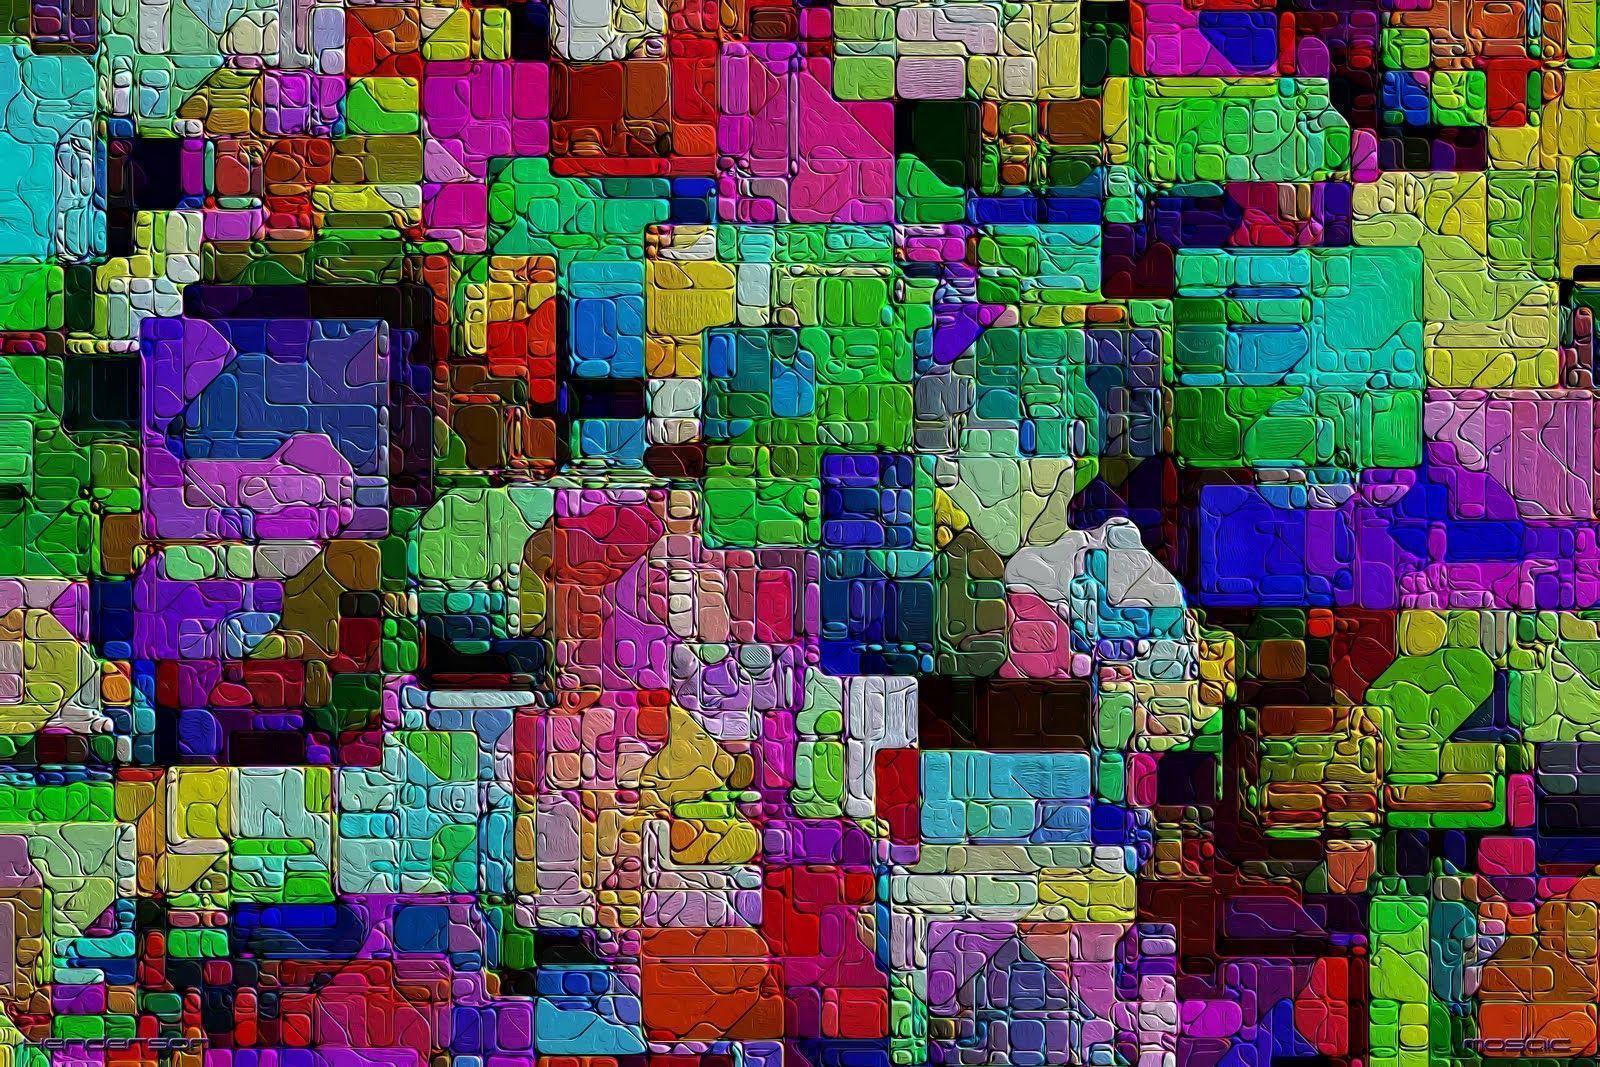 Mosaic wallpaper for your mobile devices